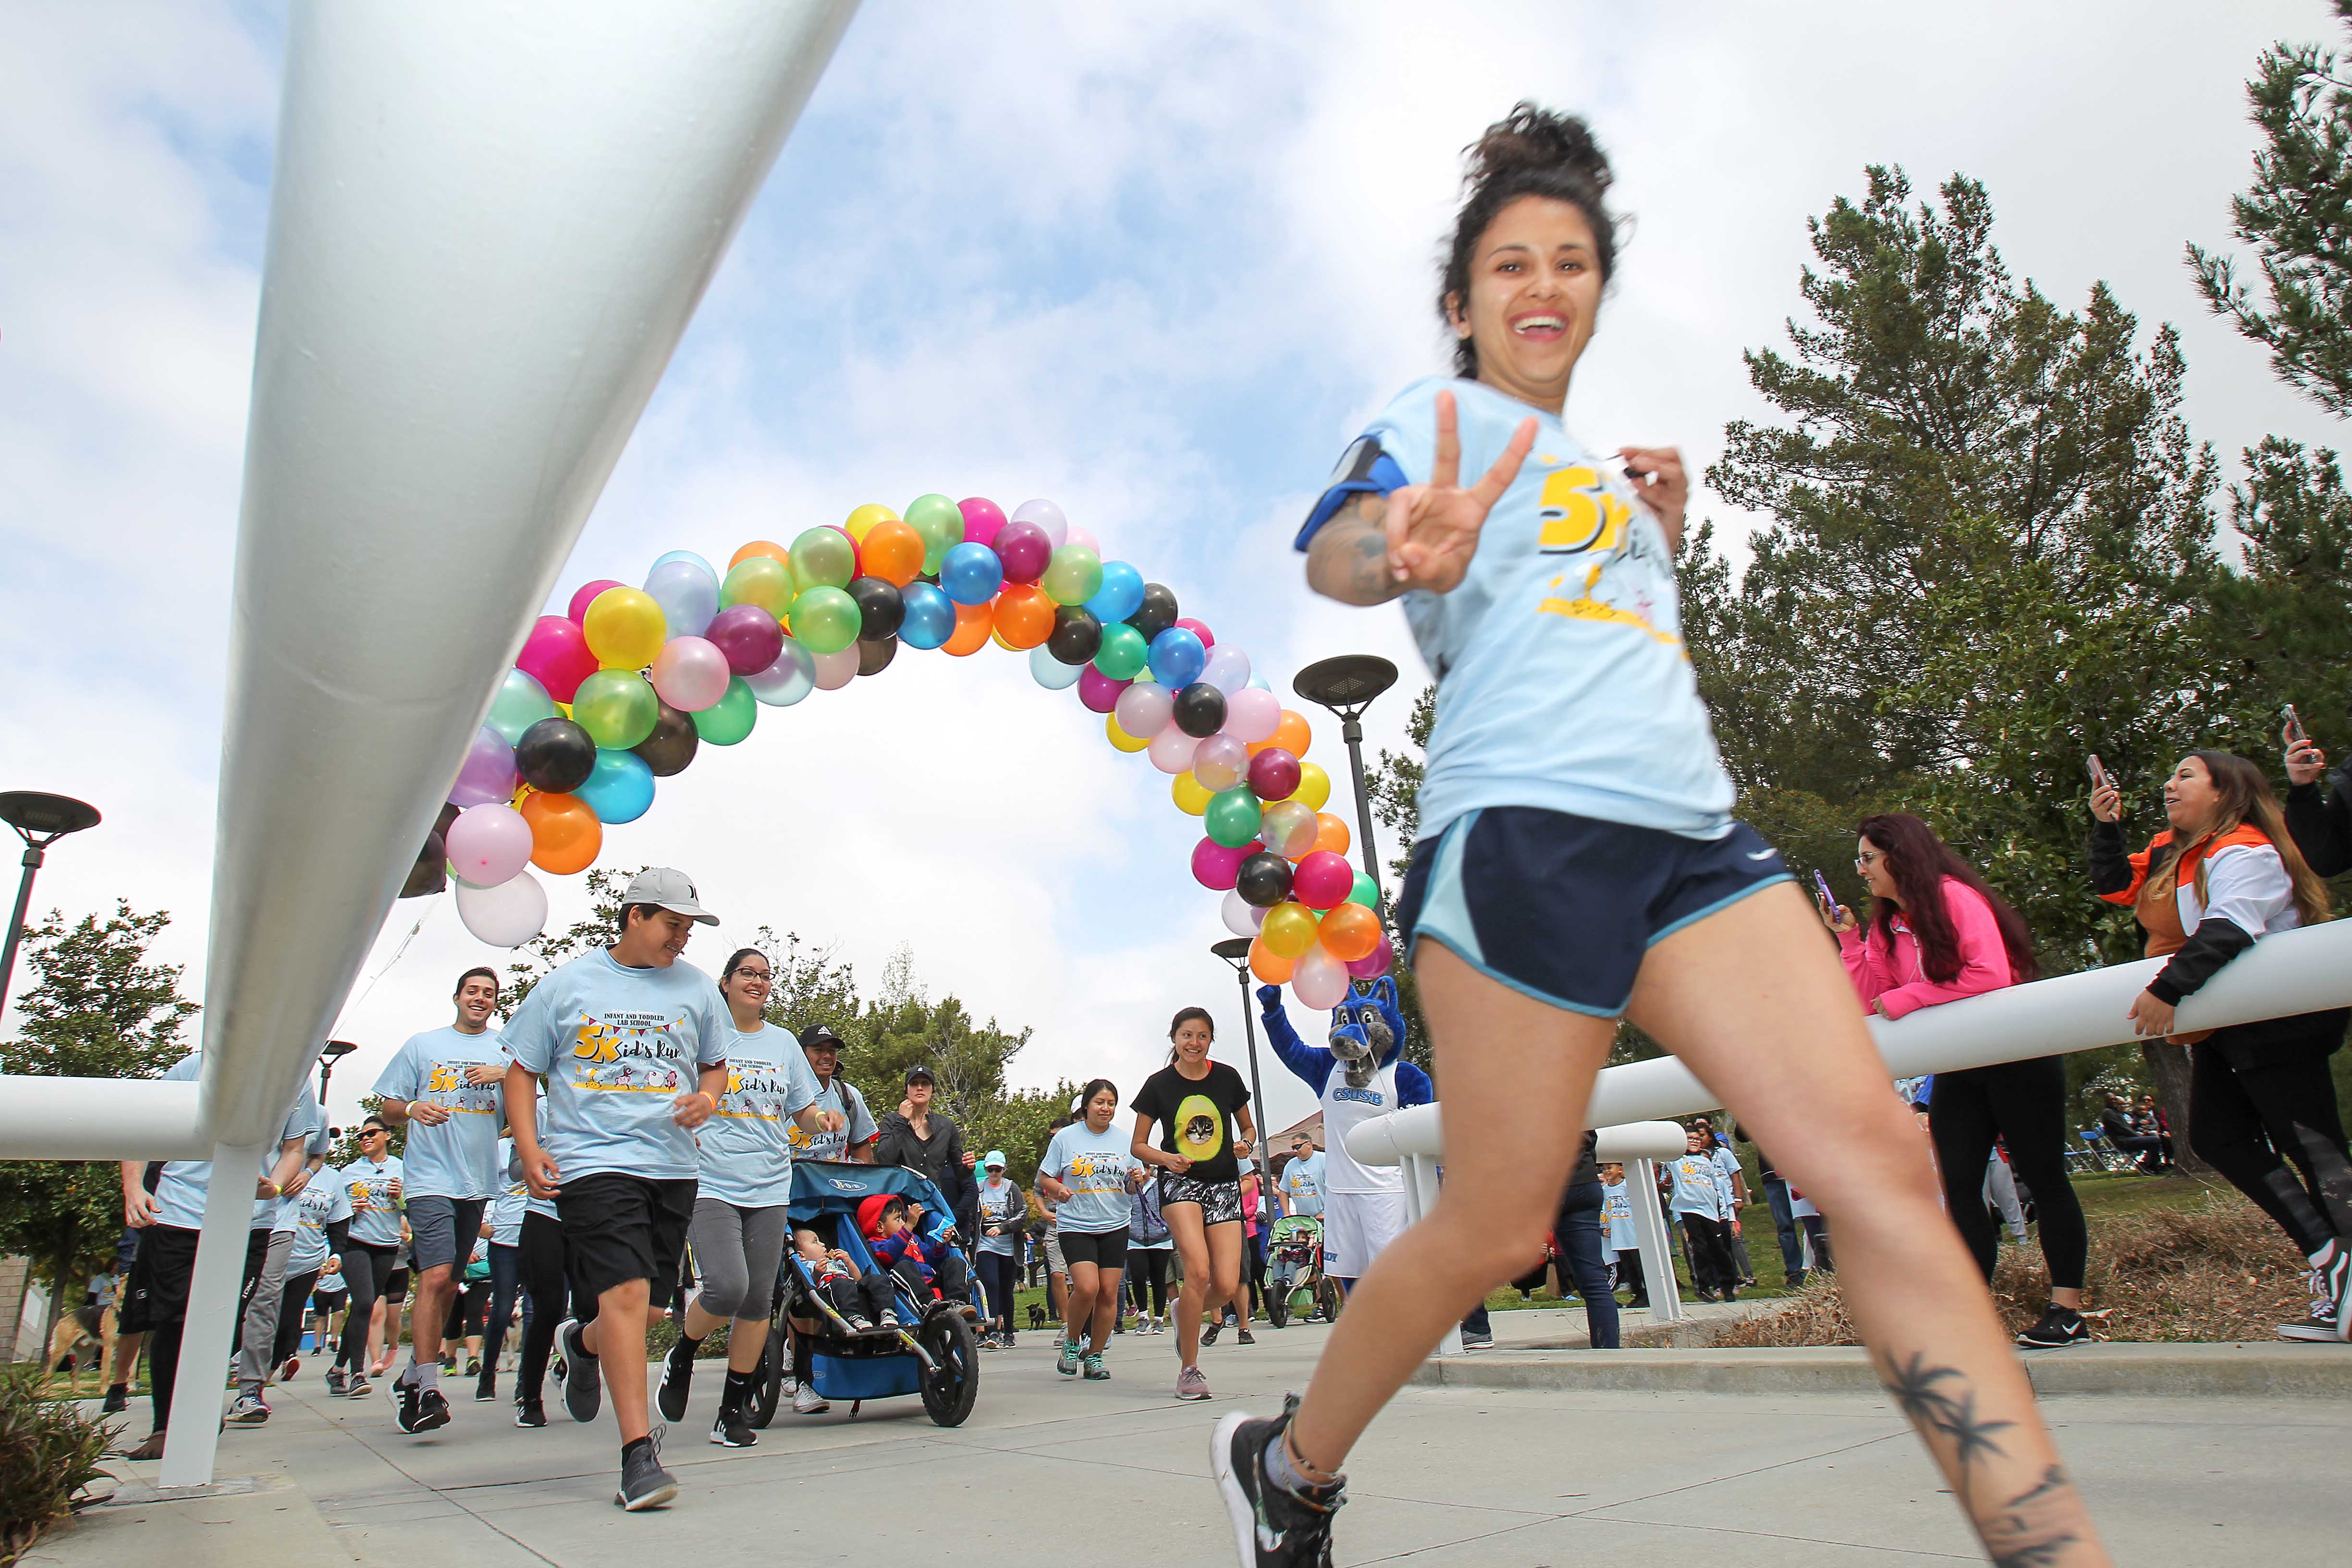 Cal State San Bernardino hosted its second annual 5Kid’s Run on April 6 to benefit the university’s Infant and Toddler Lab School.